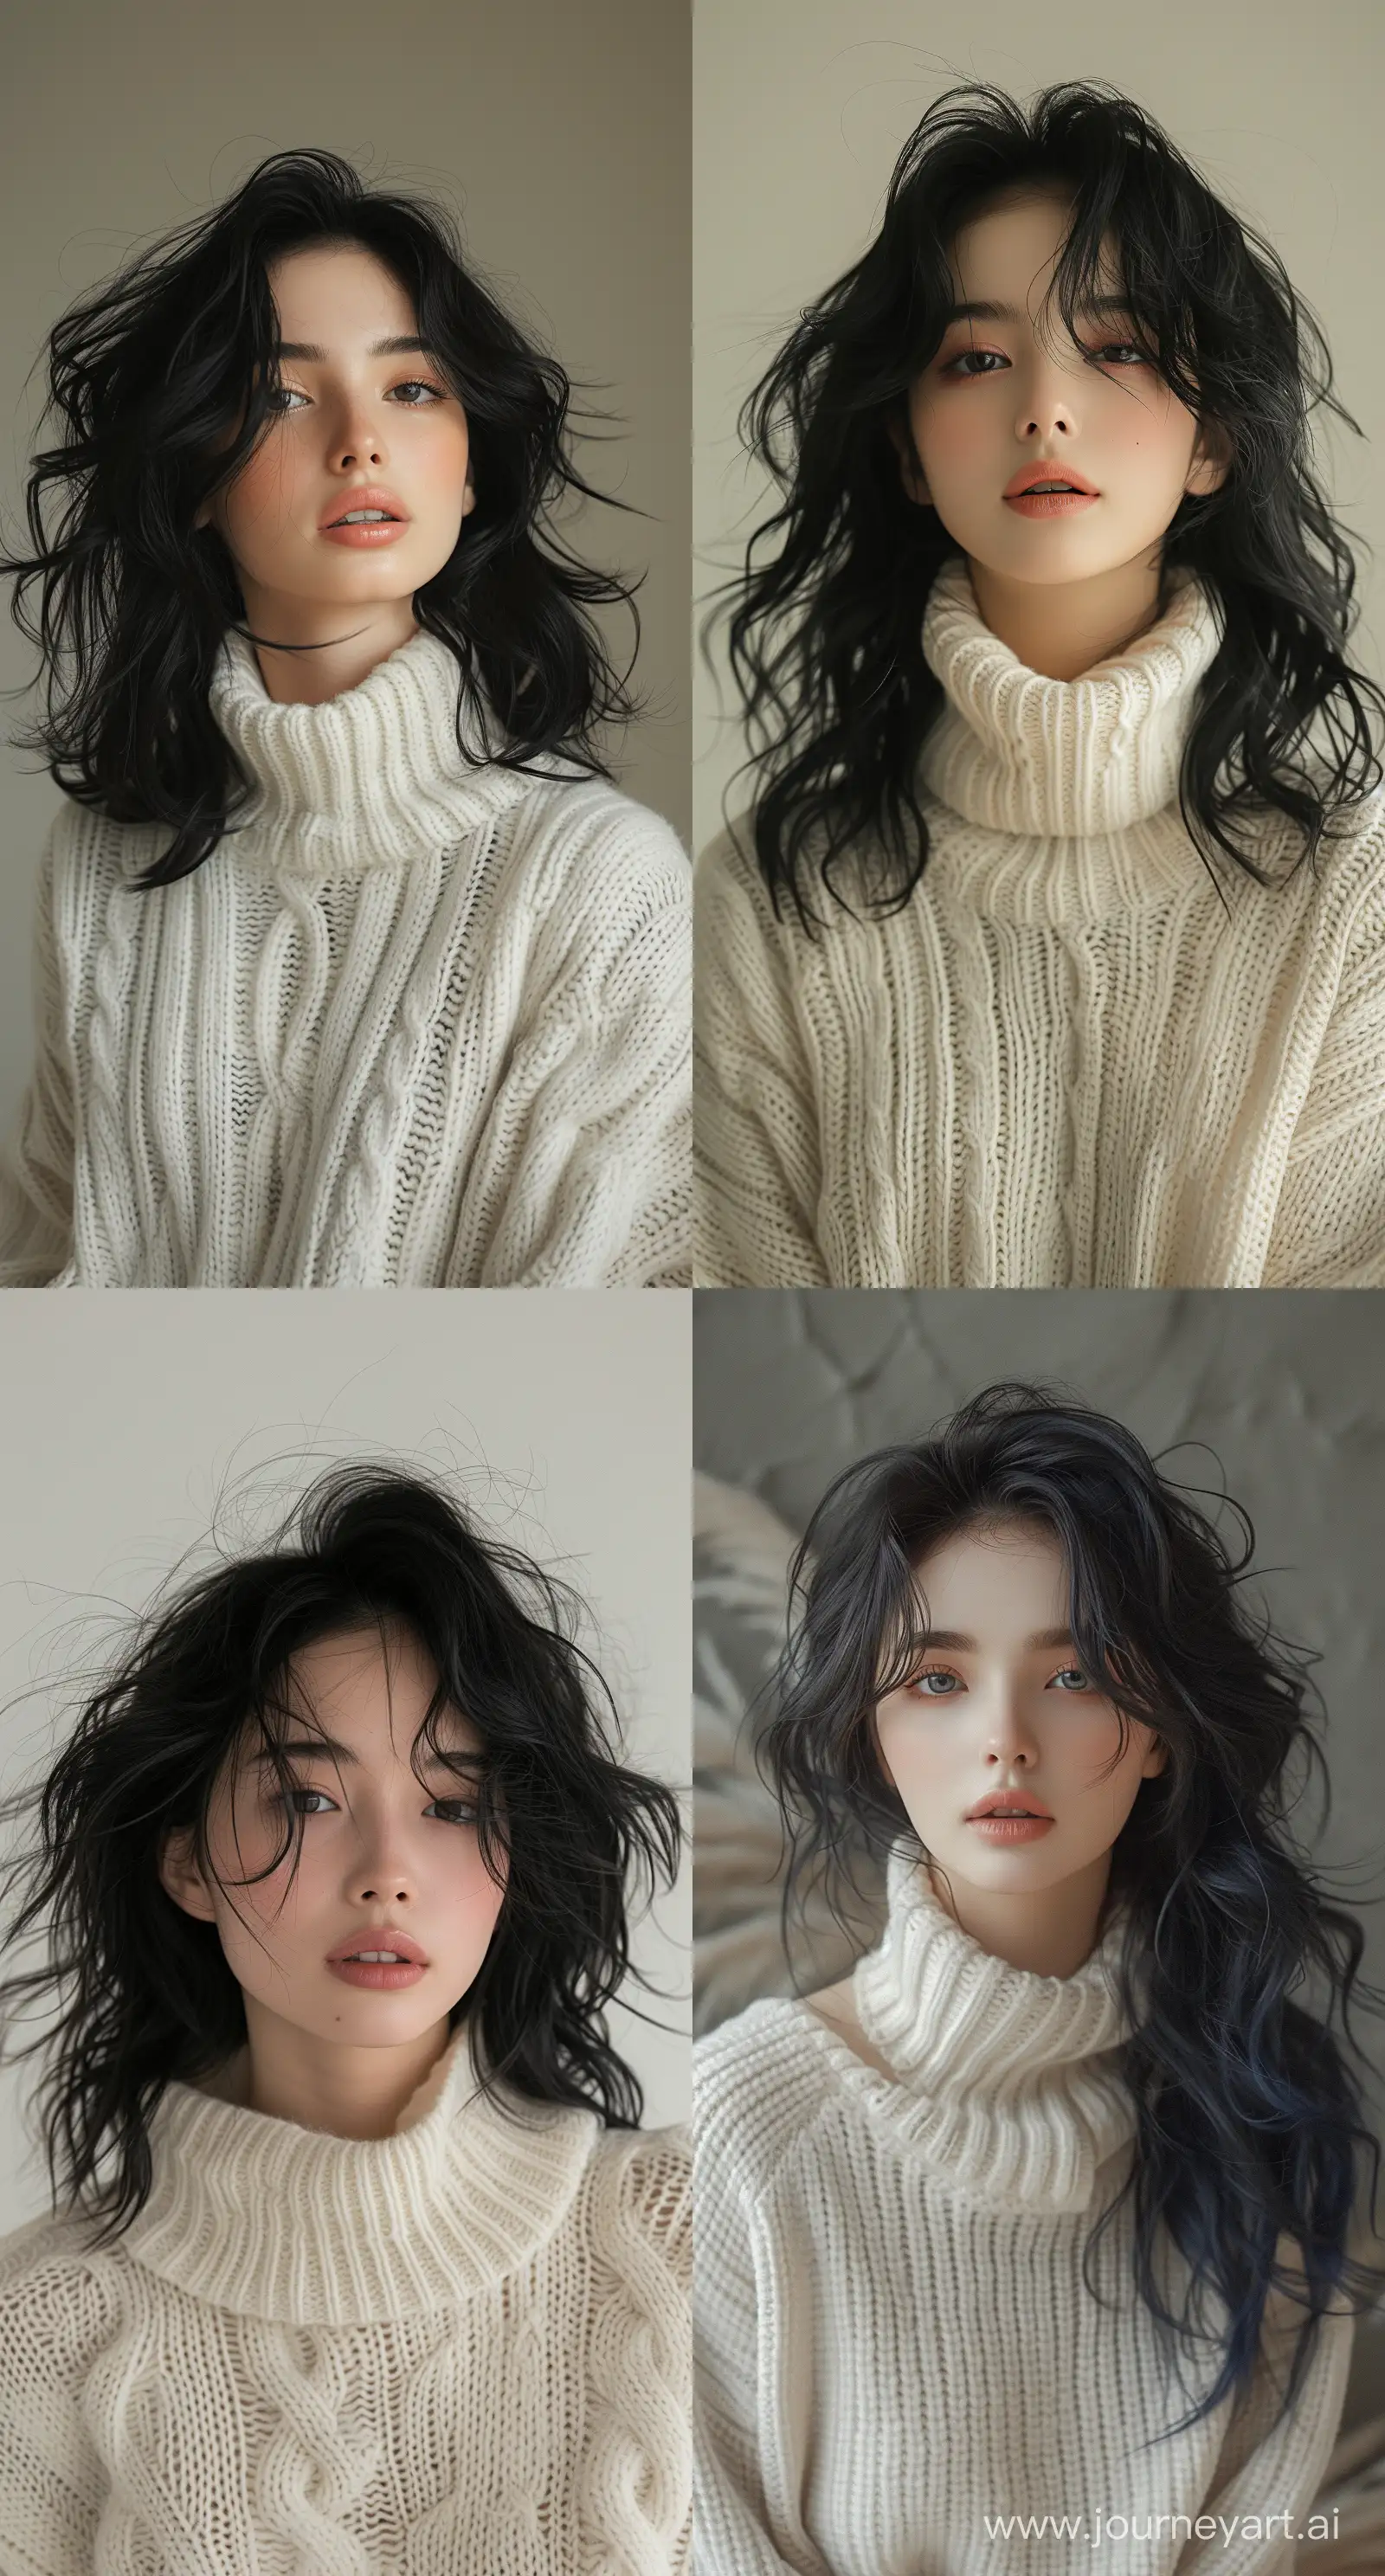 Portrait-of-a-Woman-with-Flowing-Black-Hair-and-Cream-Sweater-in-Dain-Yoon-Style